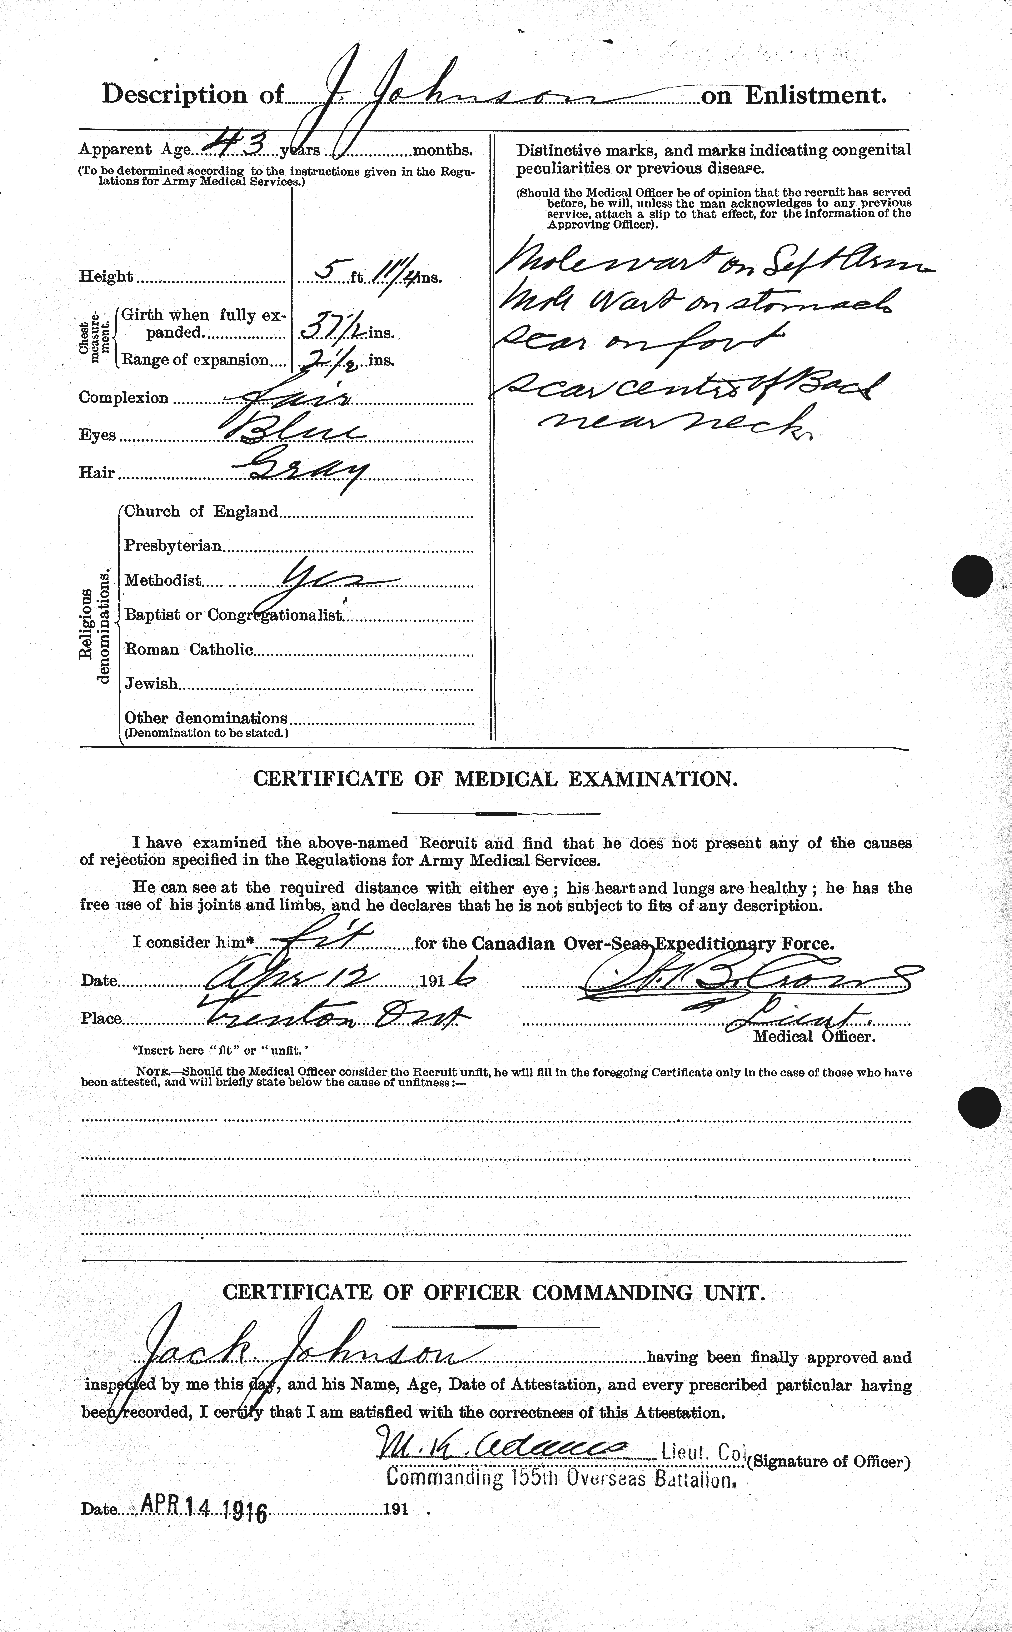 Personnel Records of the First World War - CEF 420585b